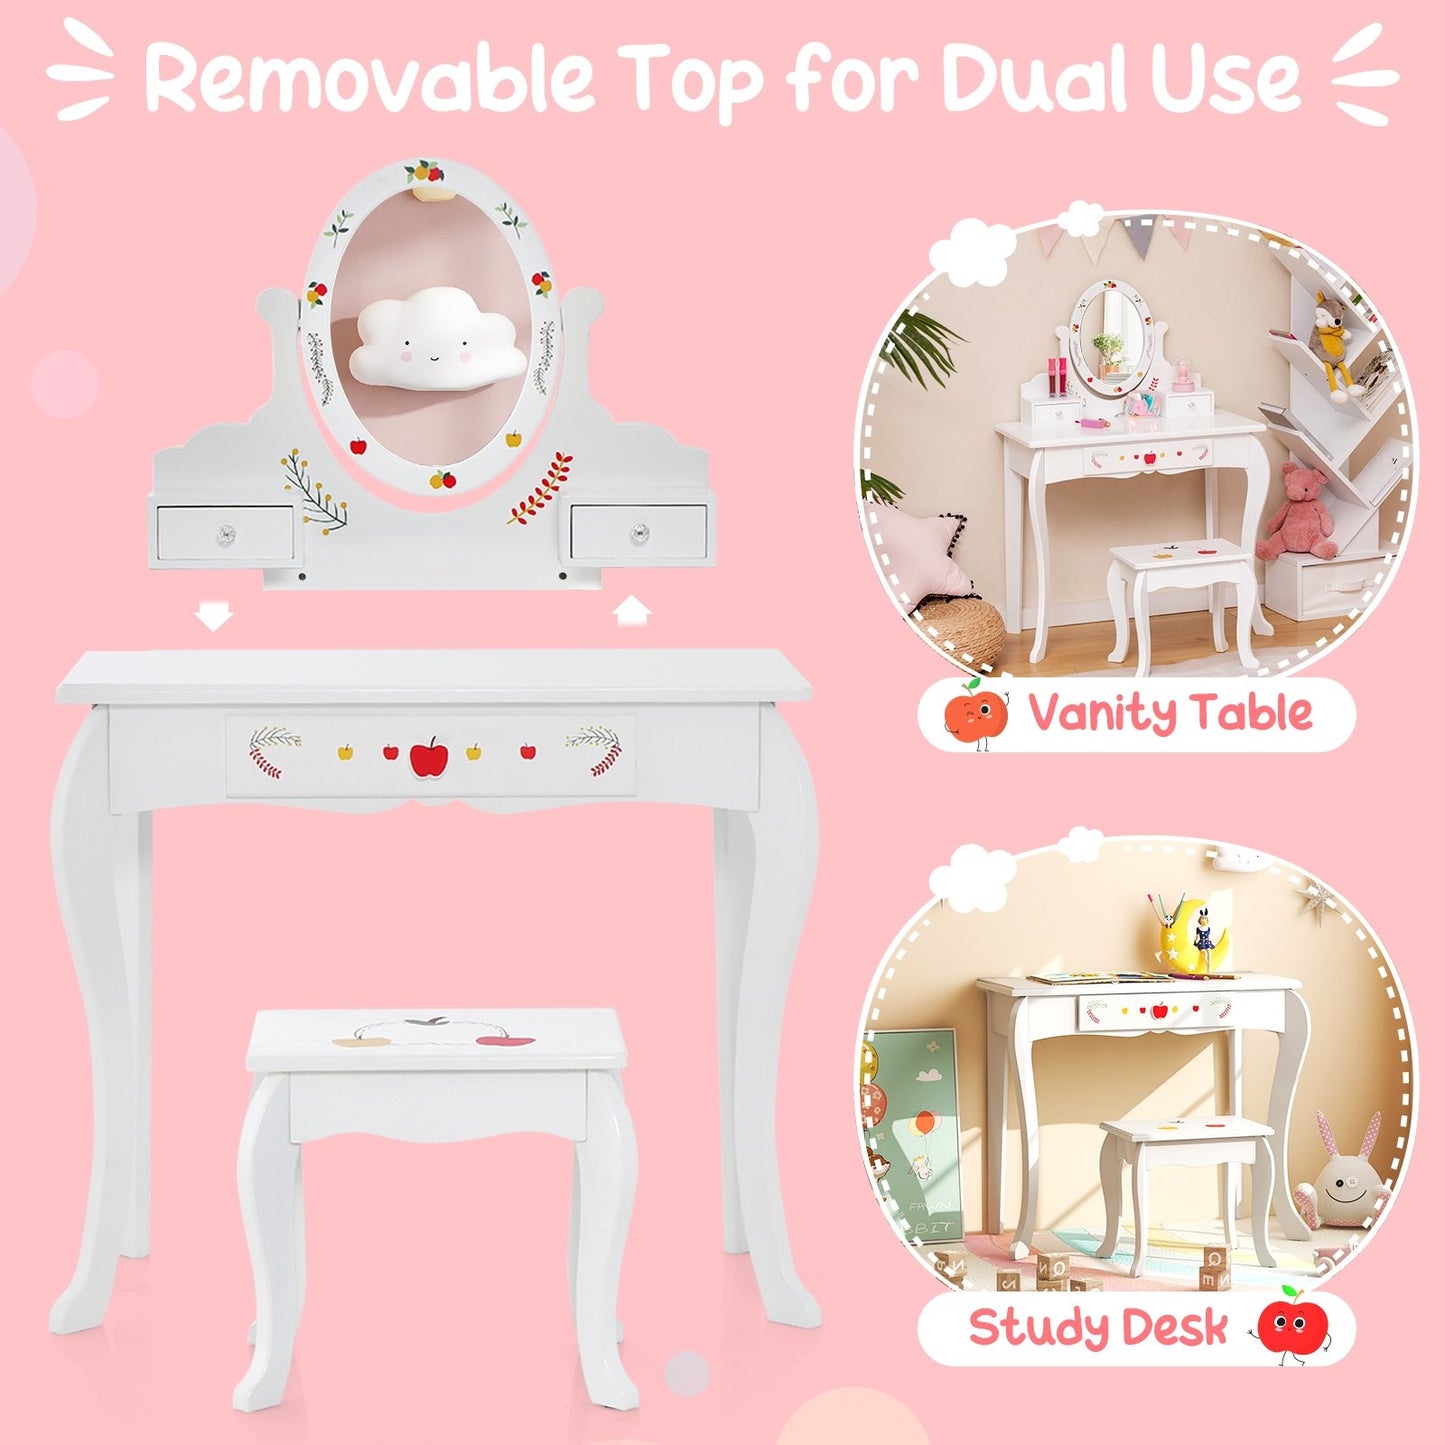 Kids Vanity and Stool Set with 360° Rotatable Mirror and Whiteboard, White